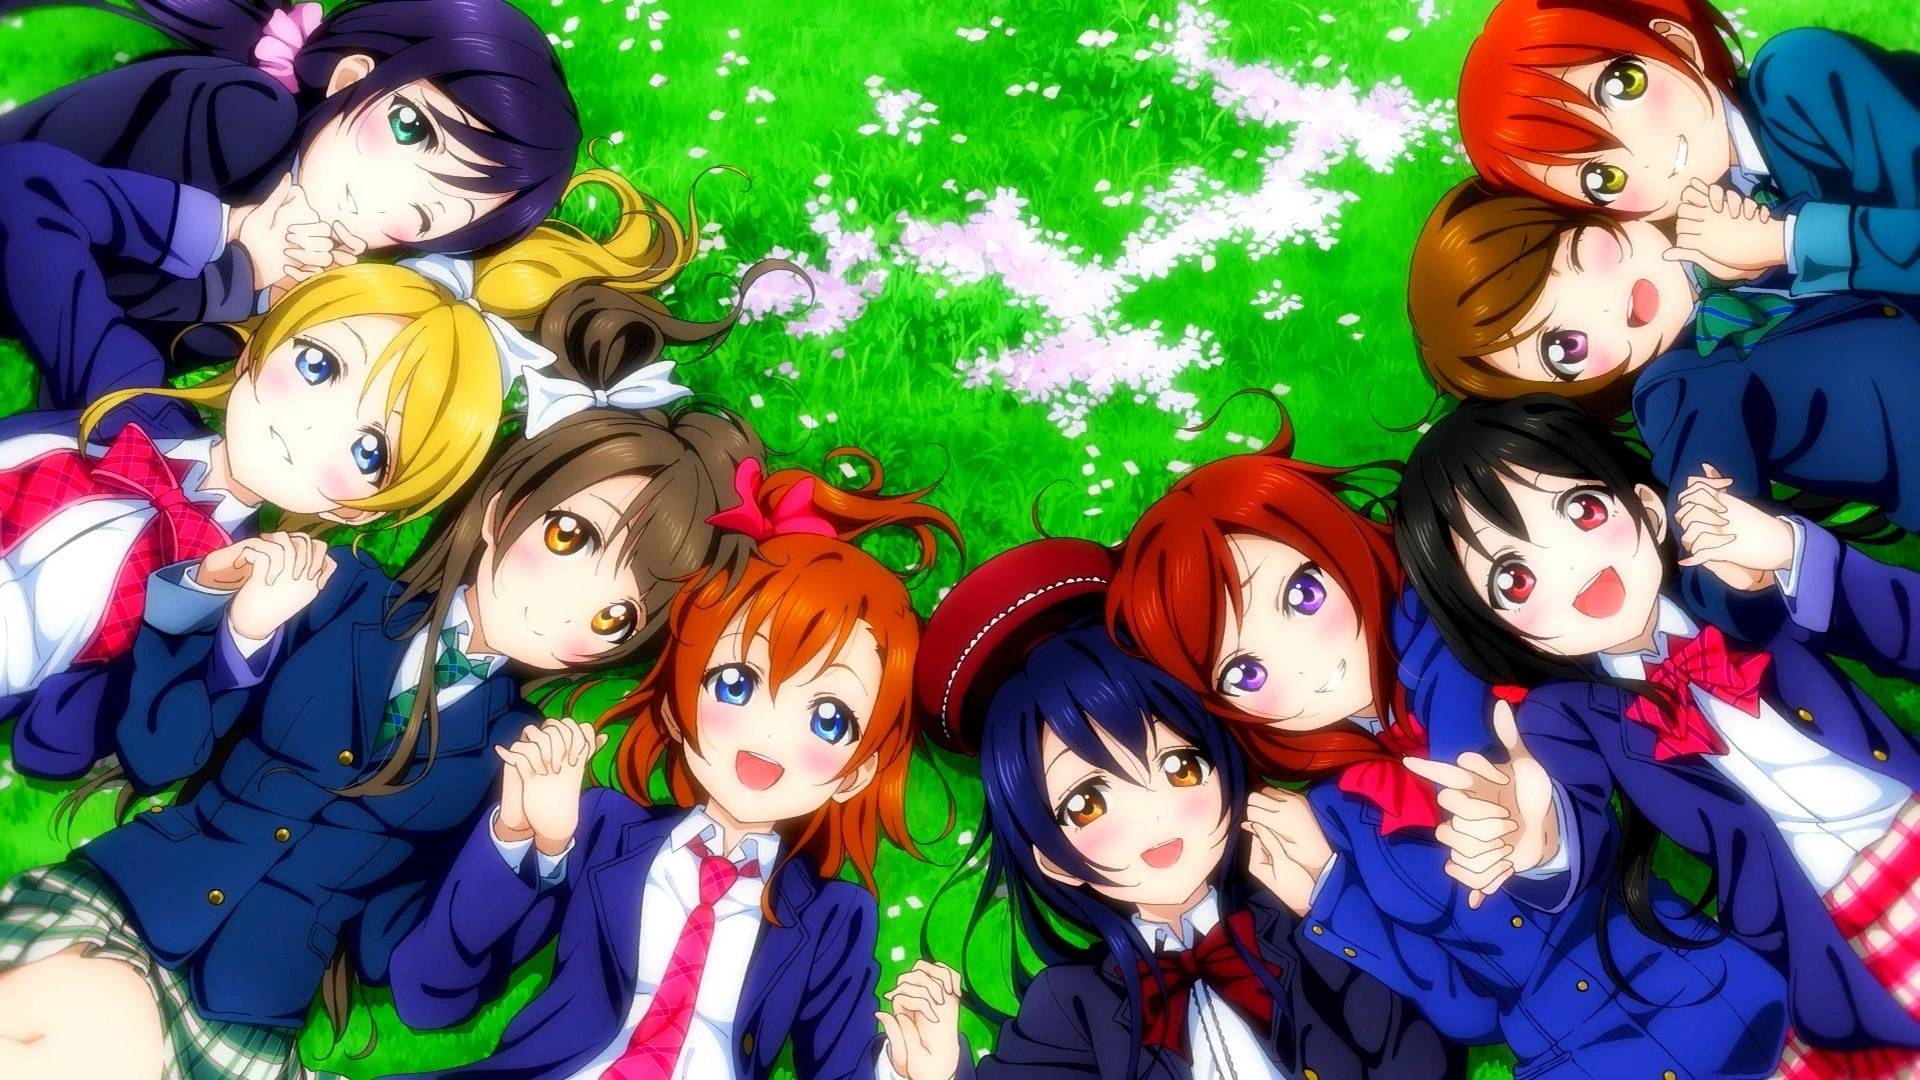 Love Live! HD Wallpapers - Wallpaper Cave